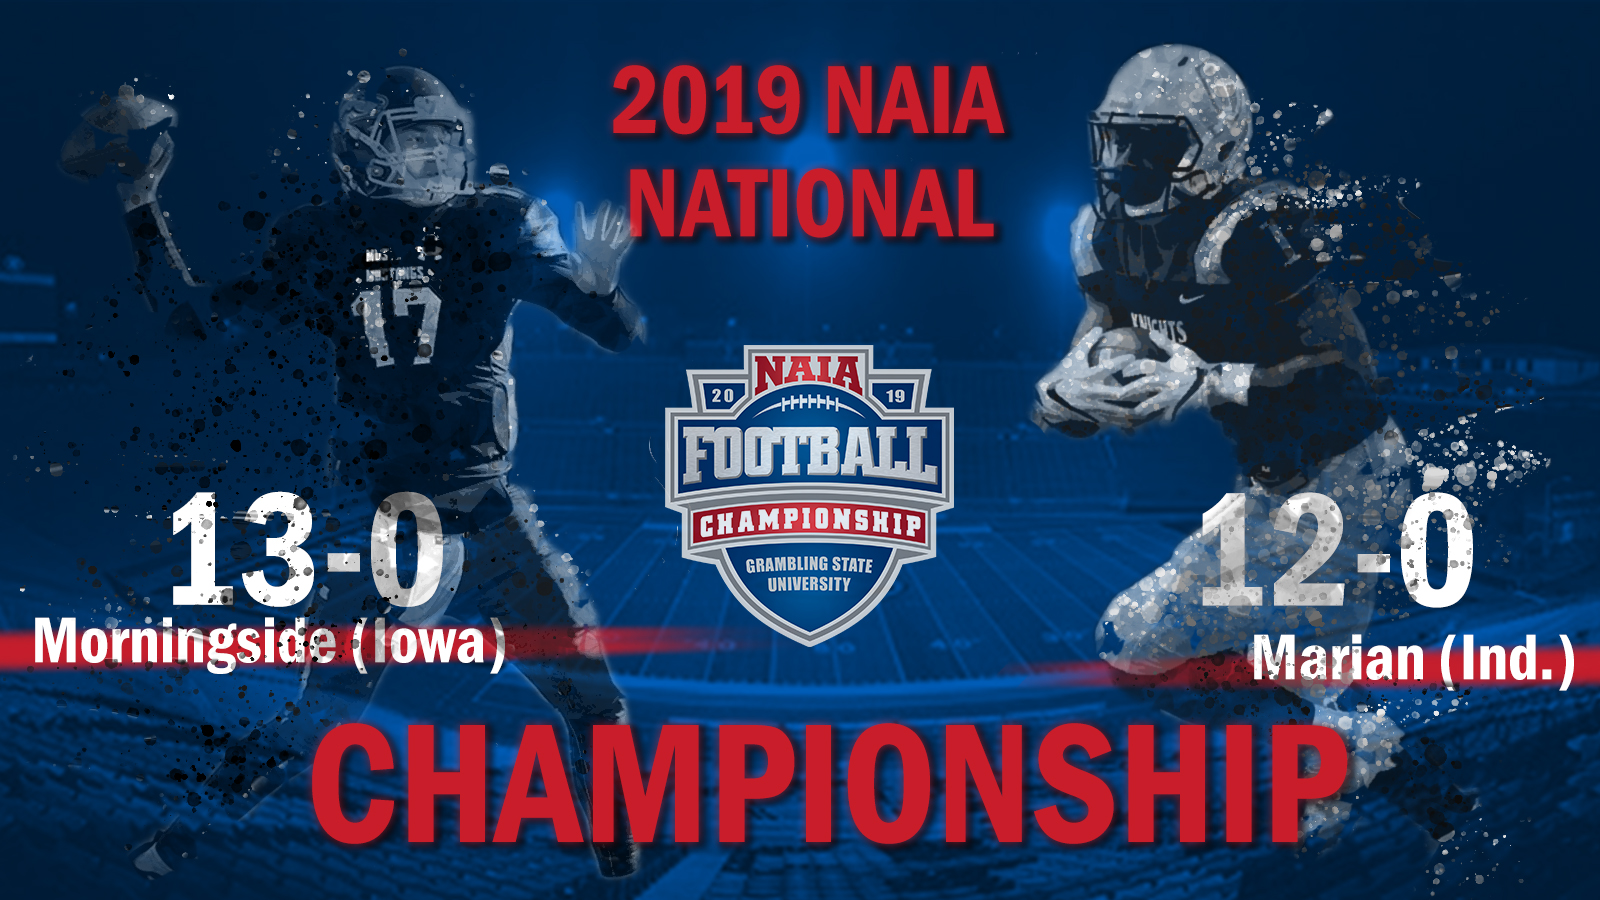 Undefeated Morningside, Marian set to square off in 2019 NAIA Football Championship